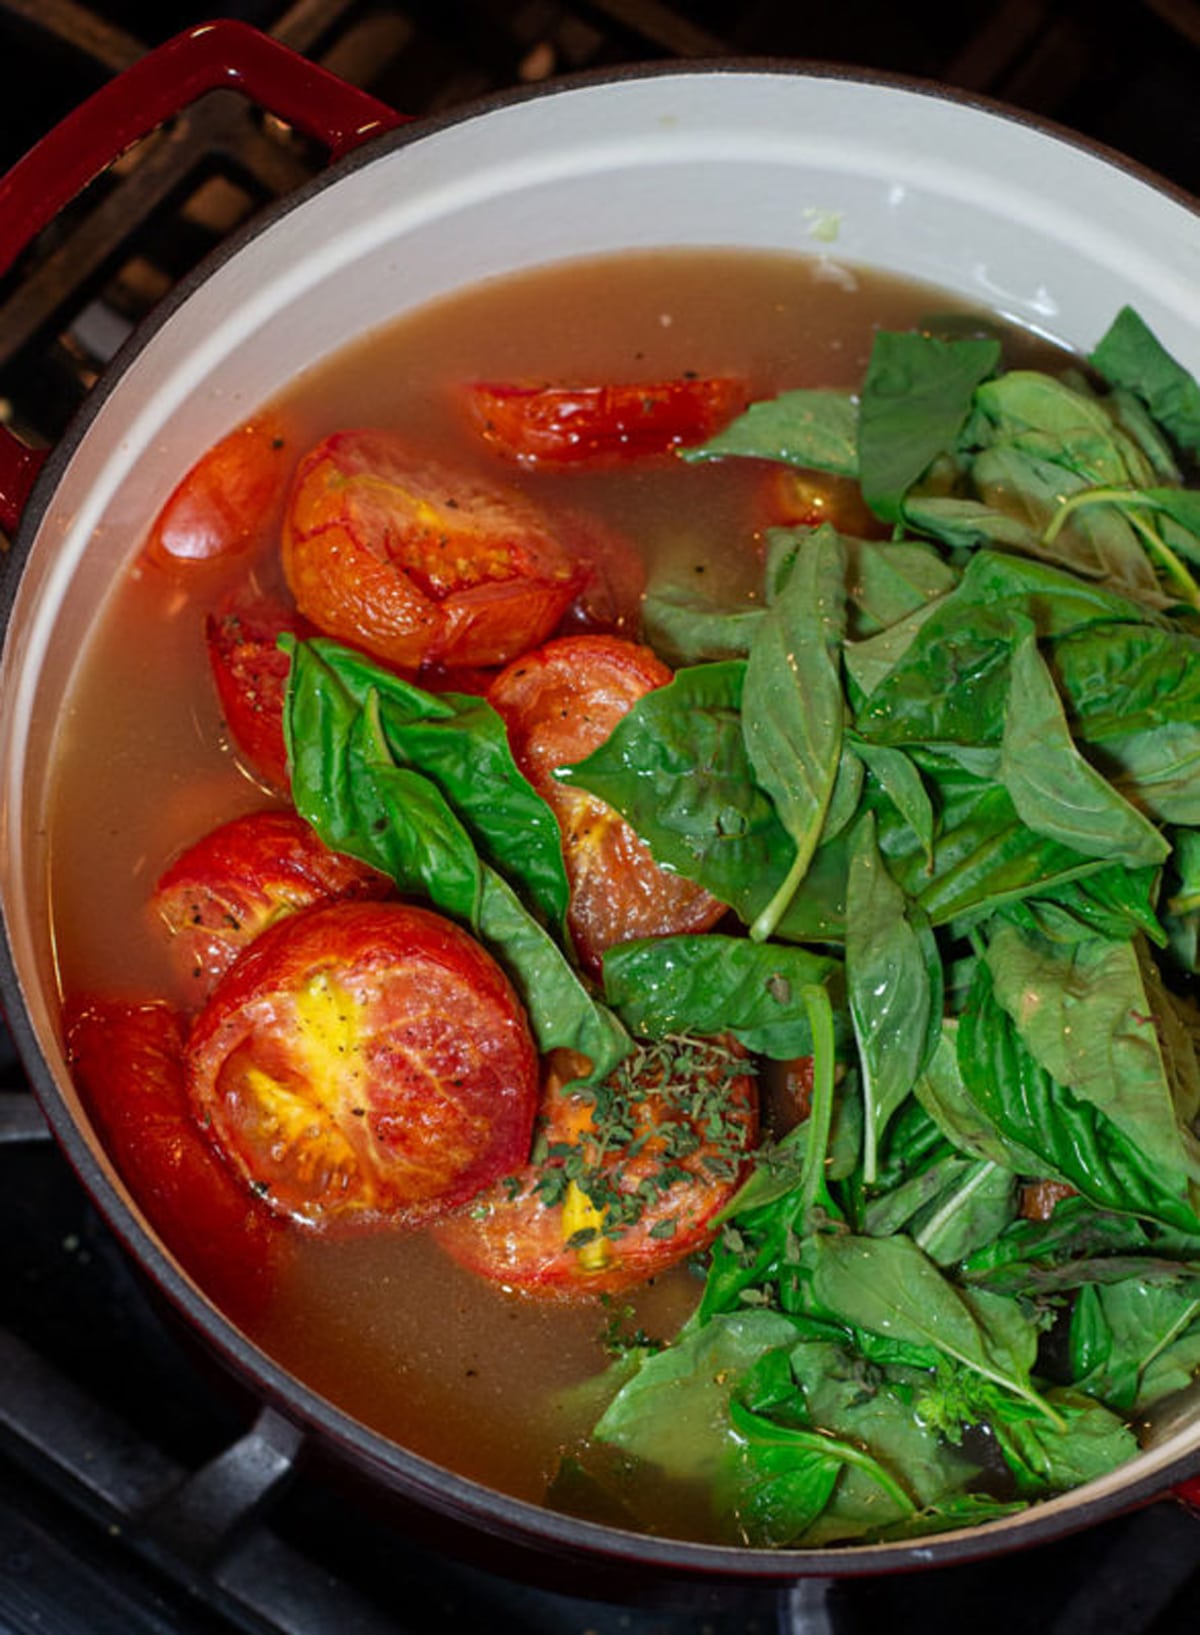 Dutch oven containing roasted tomatoes, fresh basil, chicken stock, and herbs.